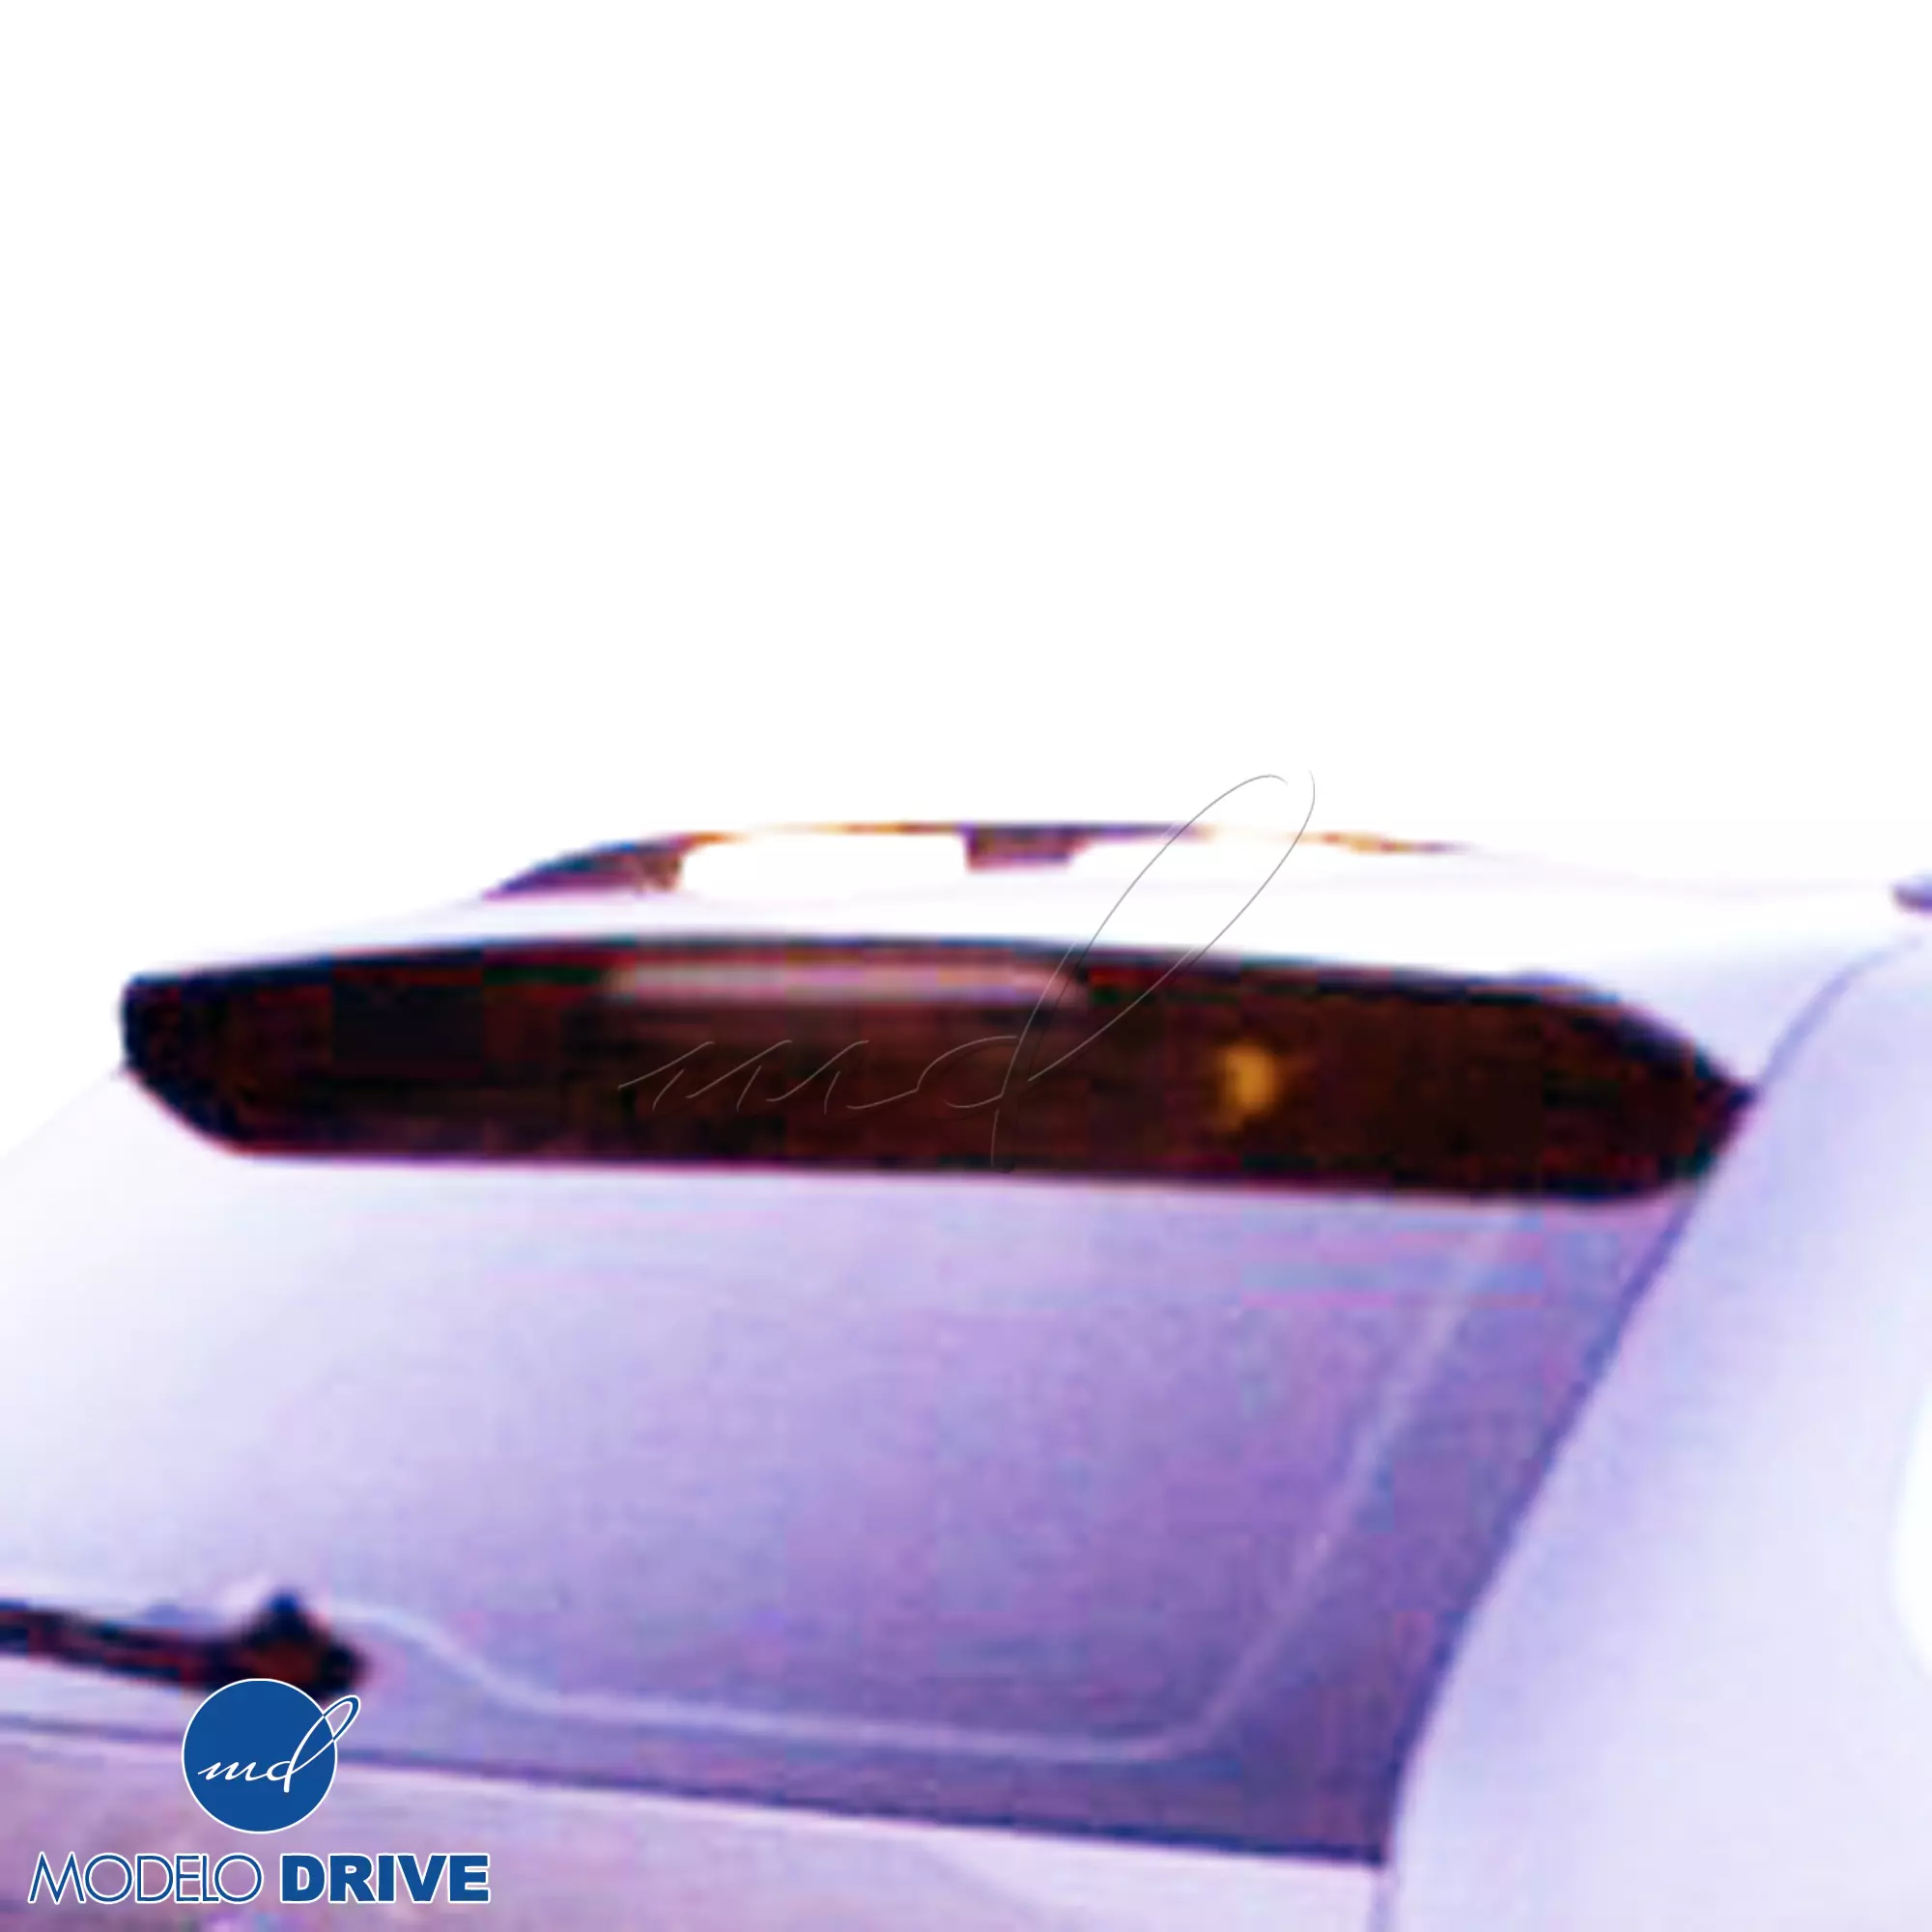 ModeloDrive FRP HAMA Roof Spoiler Wing > BMW X5 E53 2000-2006 > 5dr - Image 1